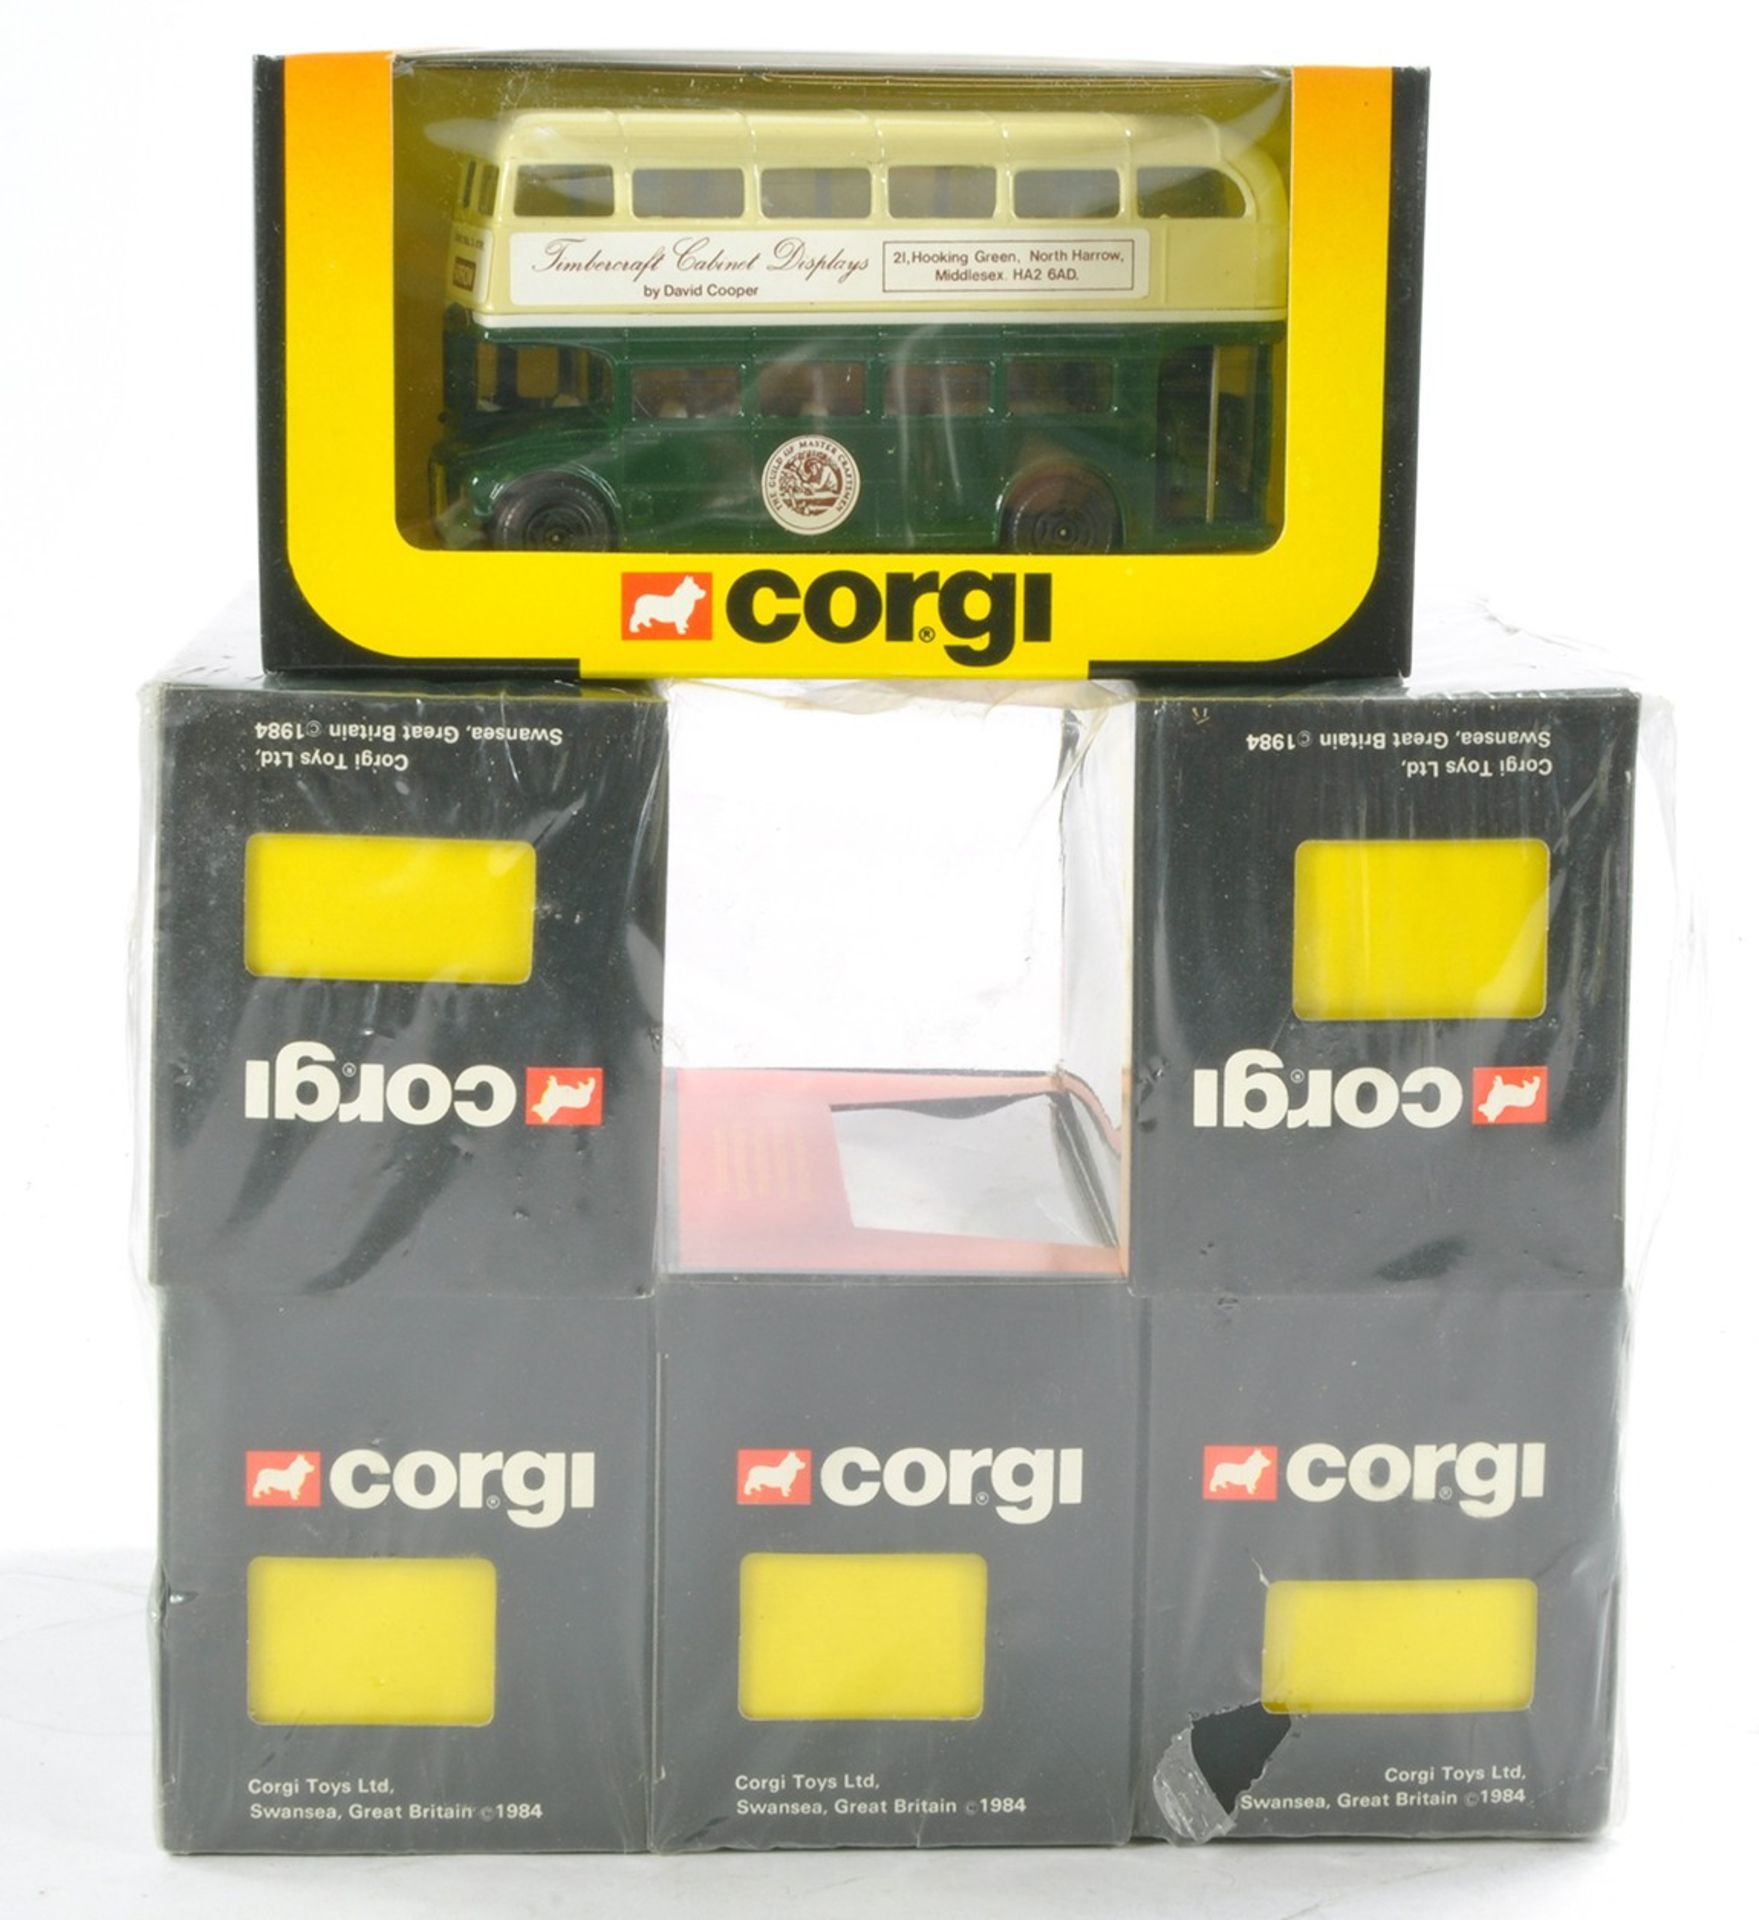 Corgi Promotional Routemaster for Timbercraft Cabinet Displays comprising trade pack of six